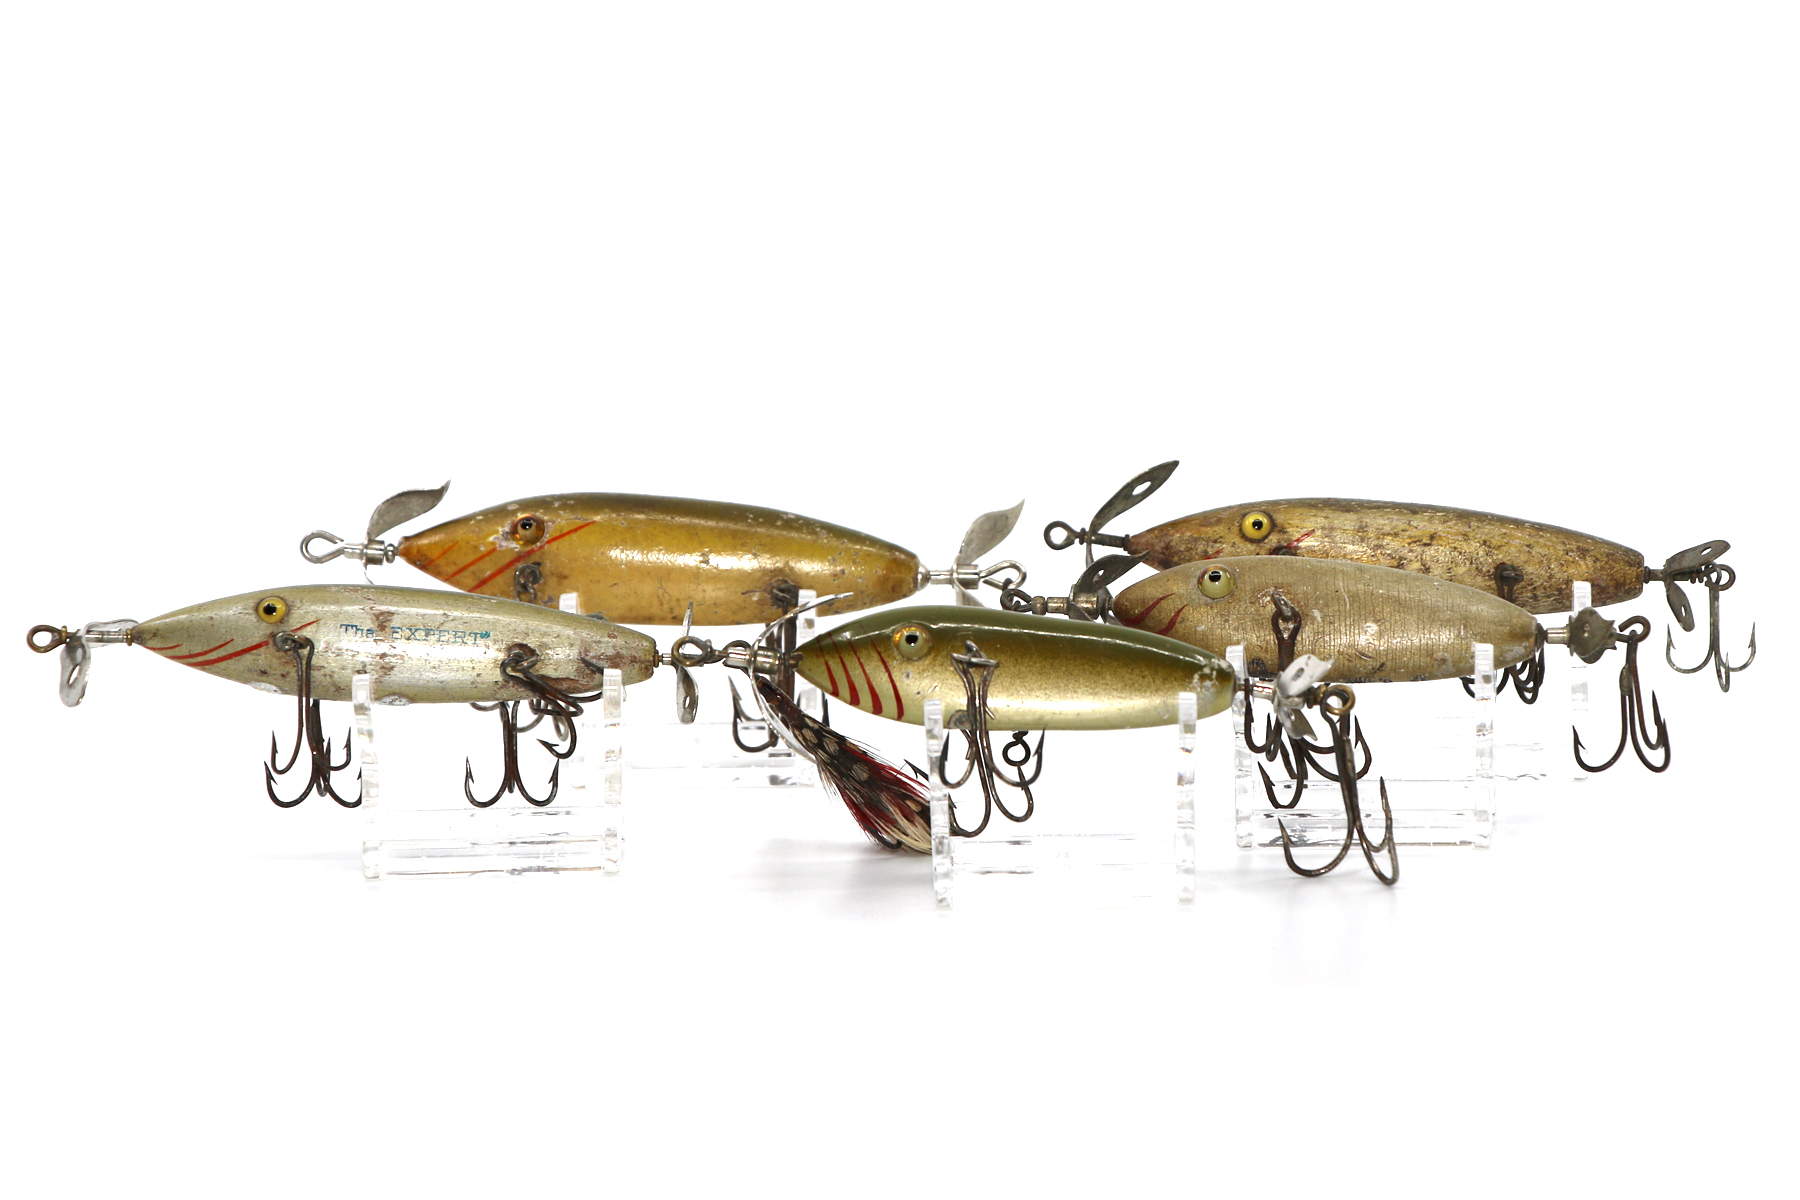 Expert Minnows - 3D Photos of My Vintage Fishing Lures